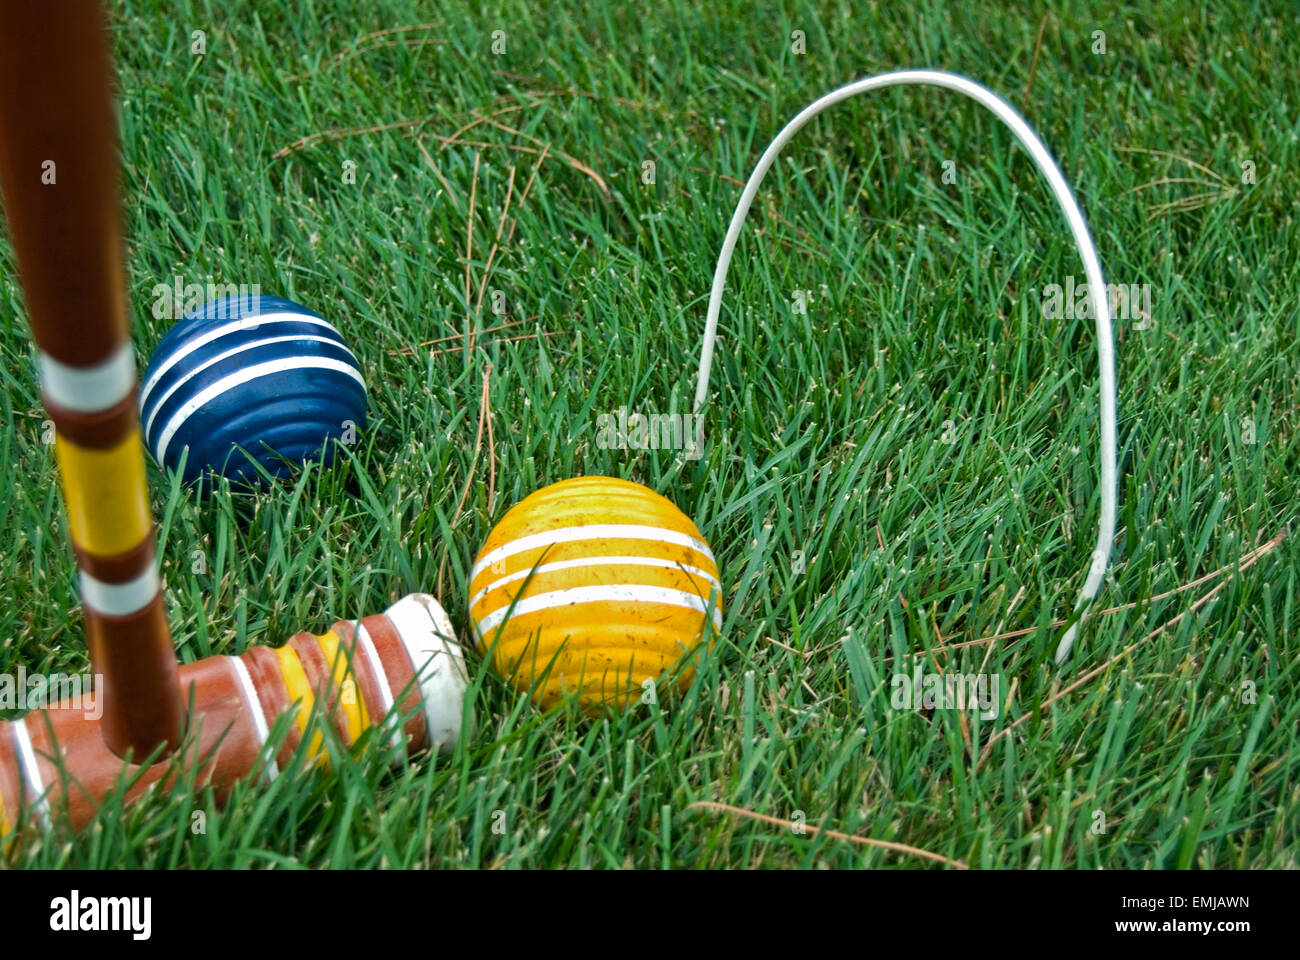 Croquet mallet and wooden croquet ball in grass with wicket. Stock Photo